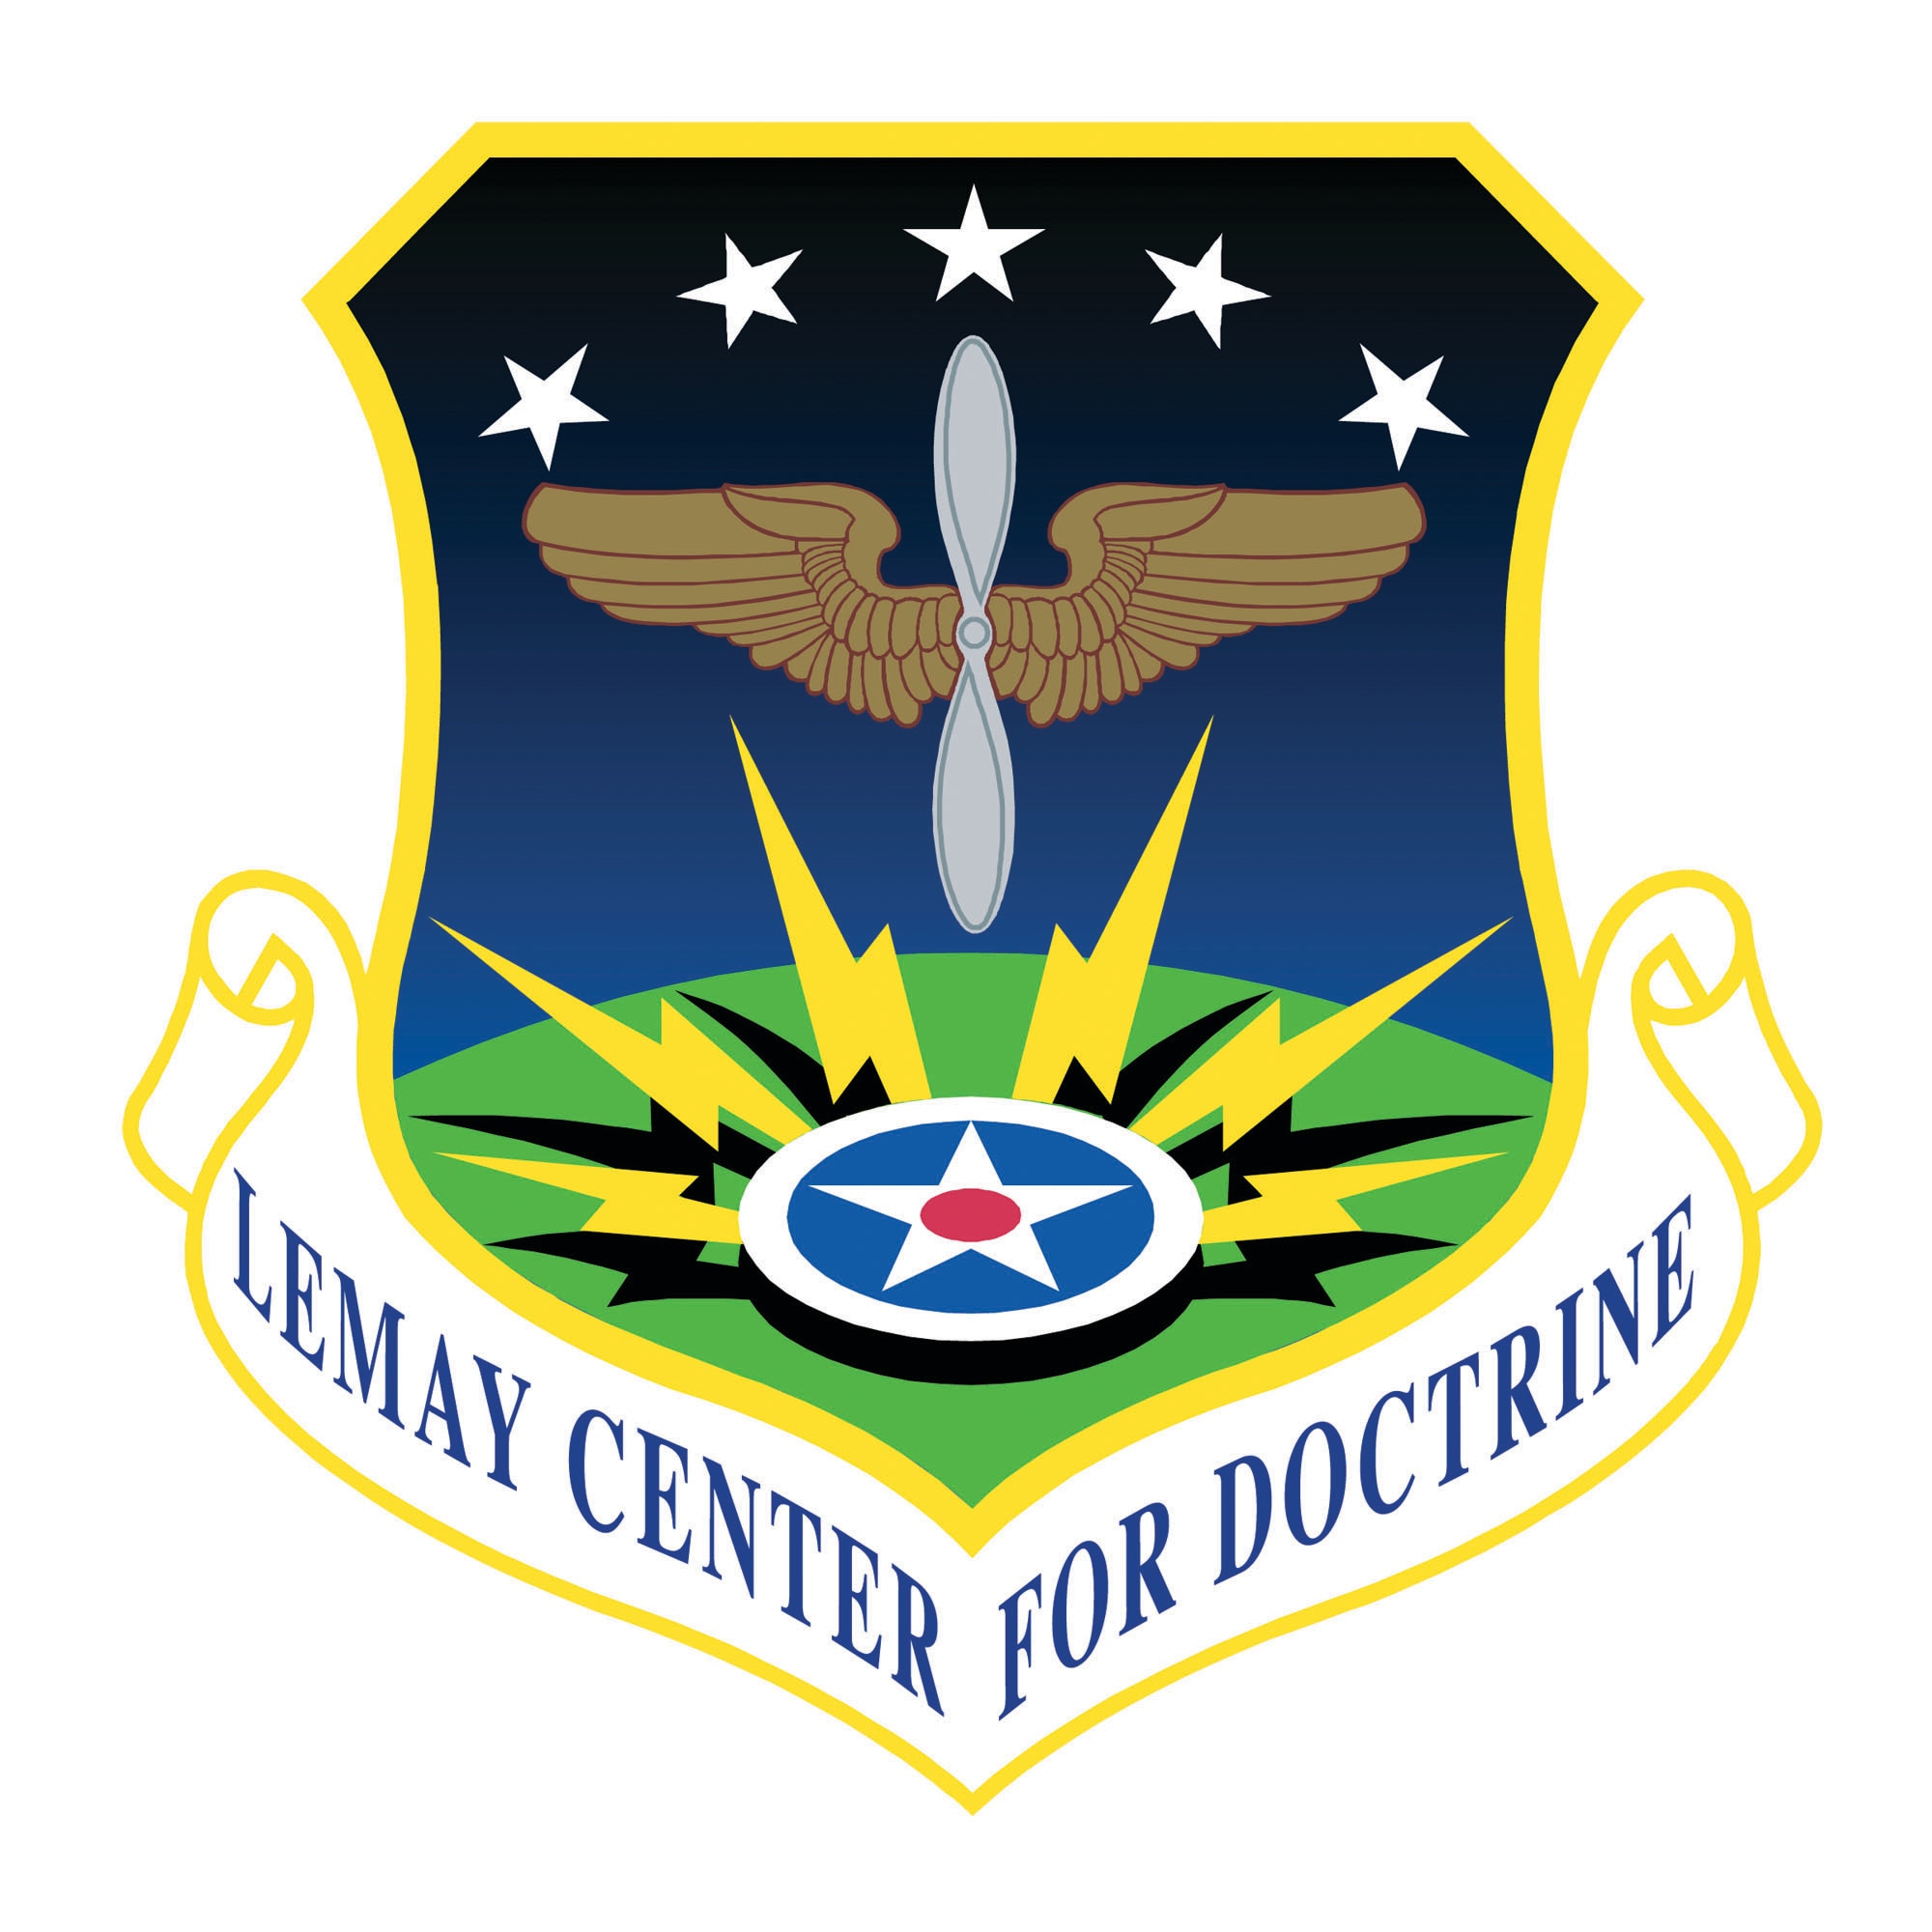 LeMay Center for Doctrine Development and Education